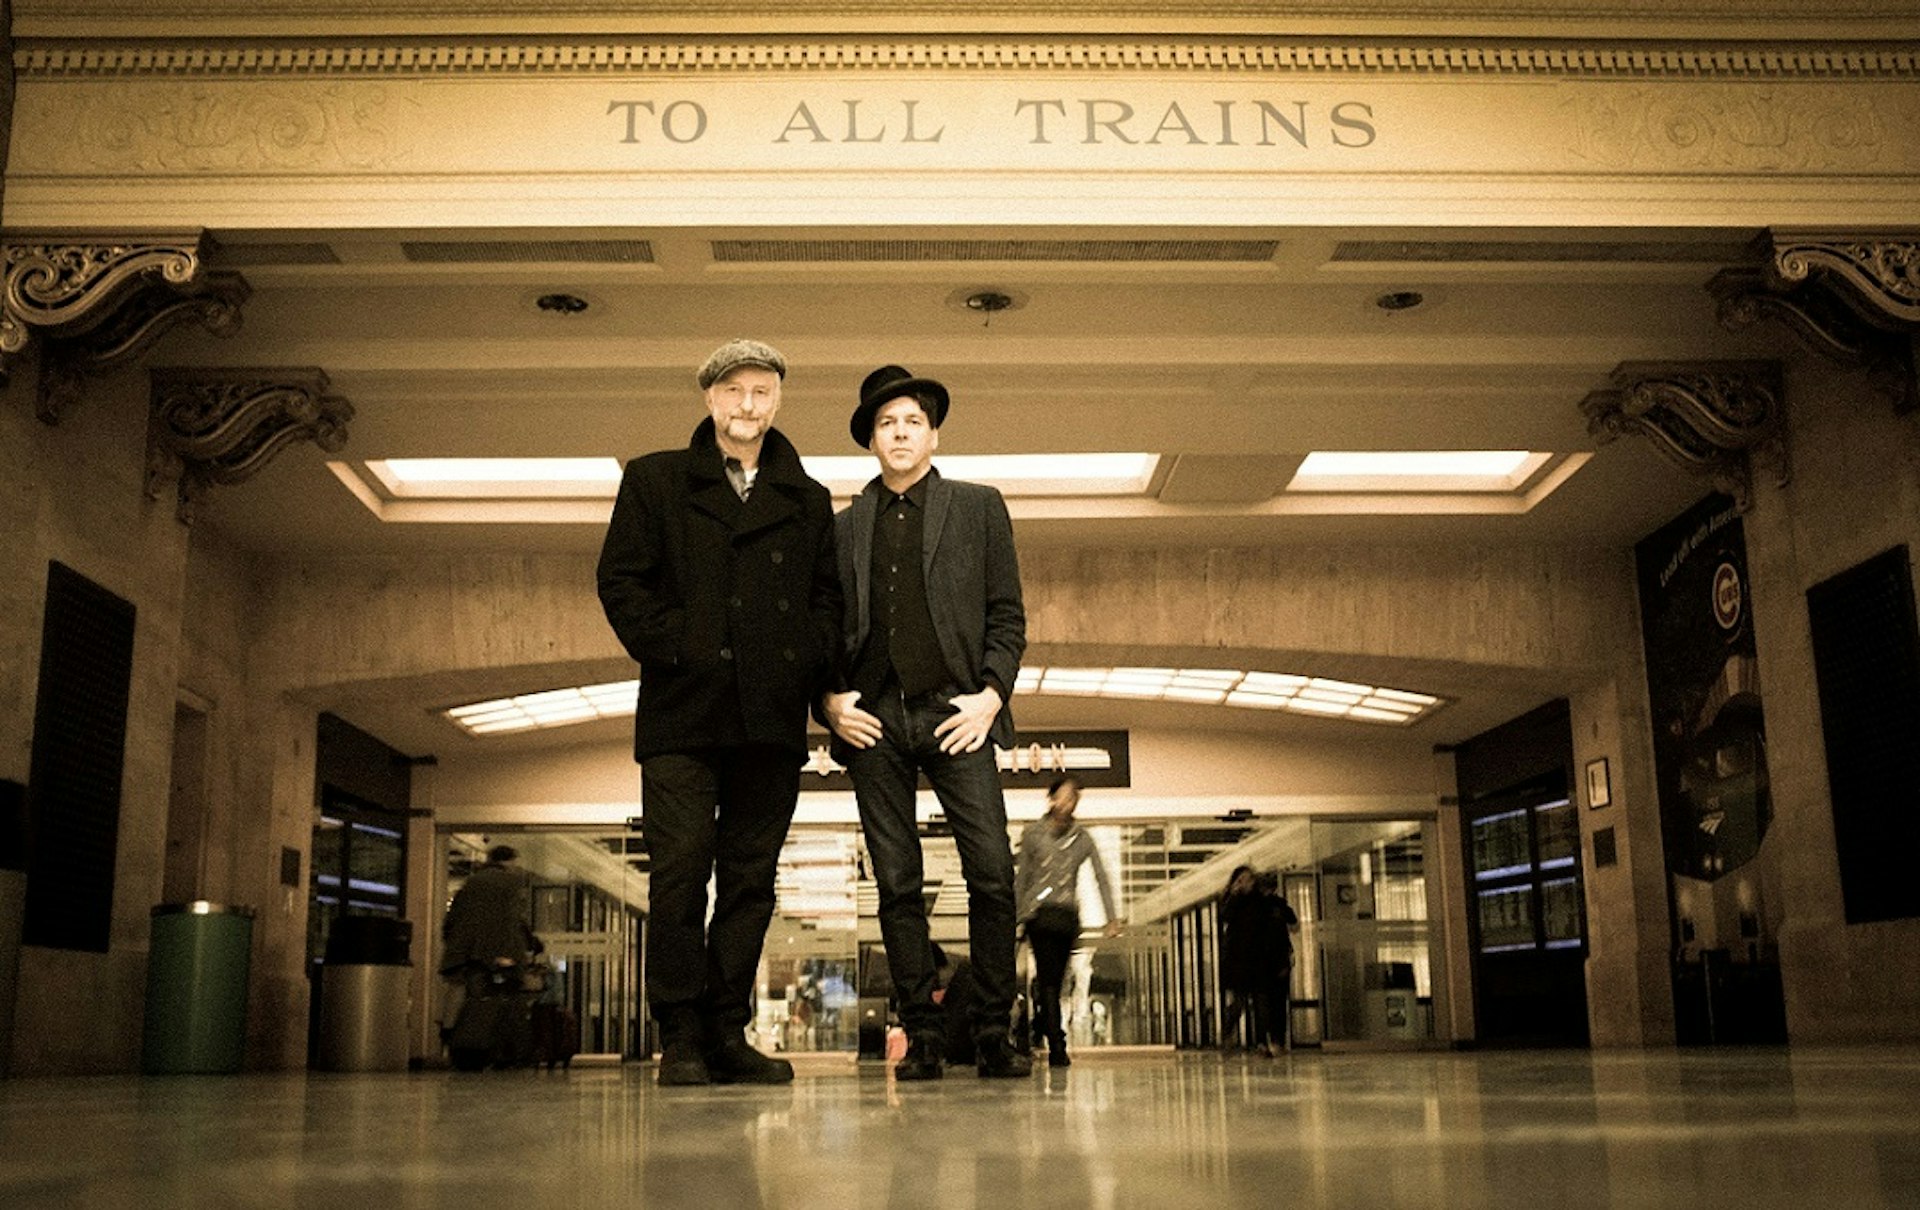 Billy Bragg and Joe Henry on trains, Trump, and the political power of pop